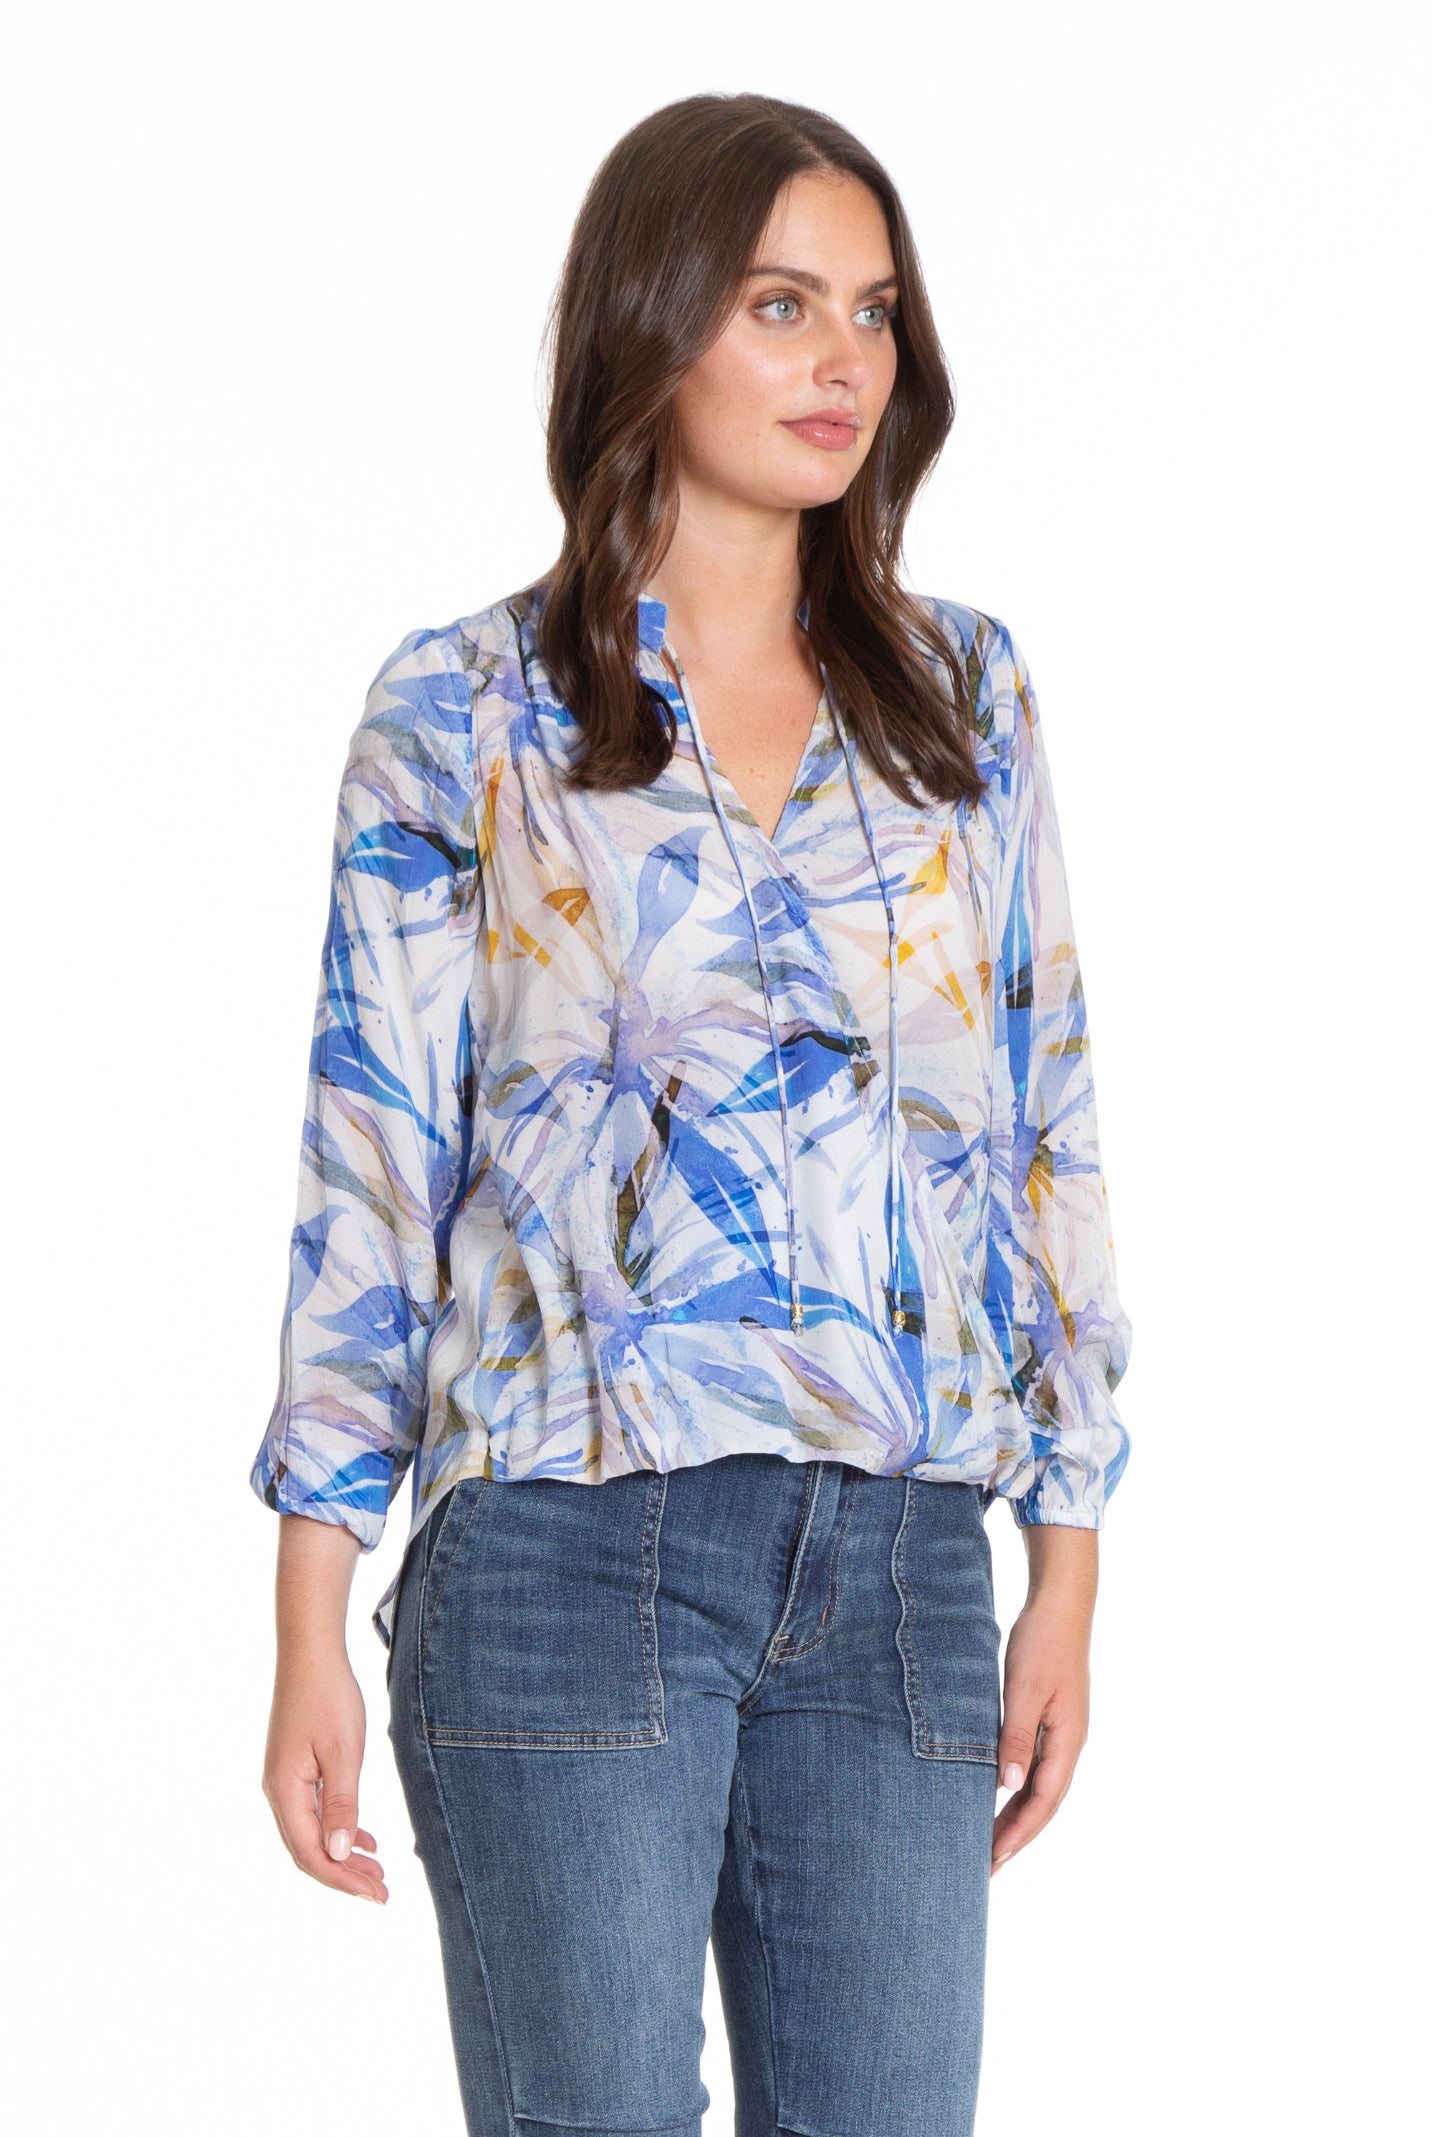 Hand Painted Abstract Floral - Crossover Top with Tassel Side APNY